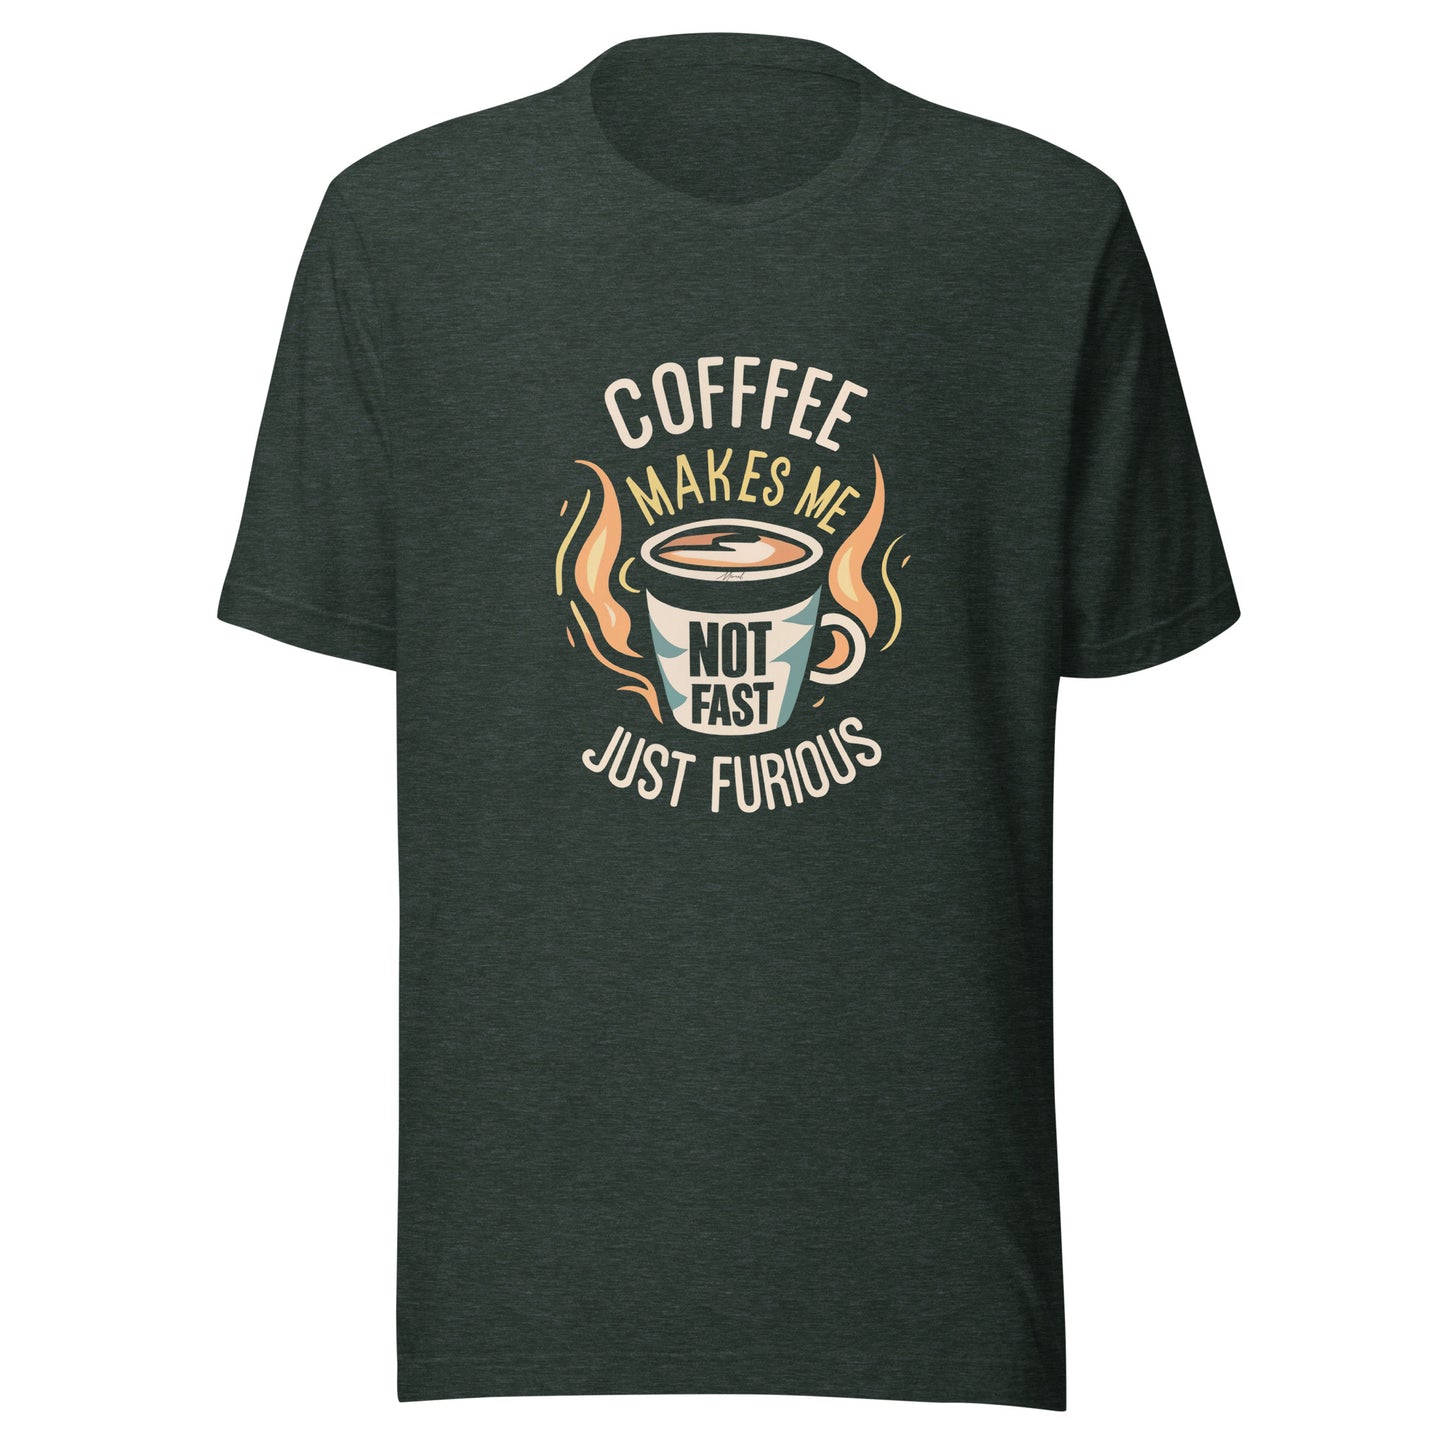 Coffe makes me not fast just furious (Unisex)